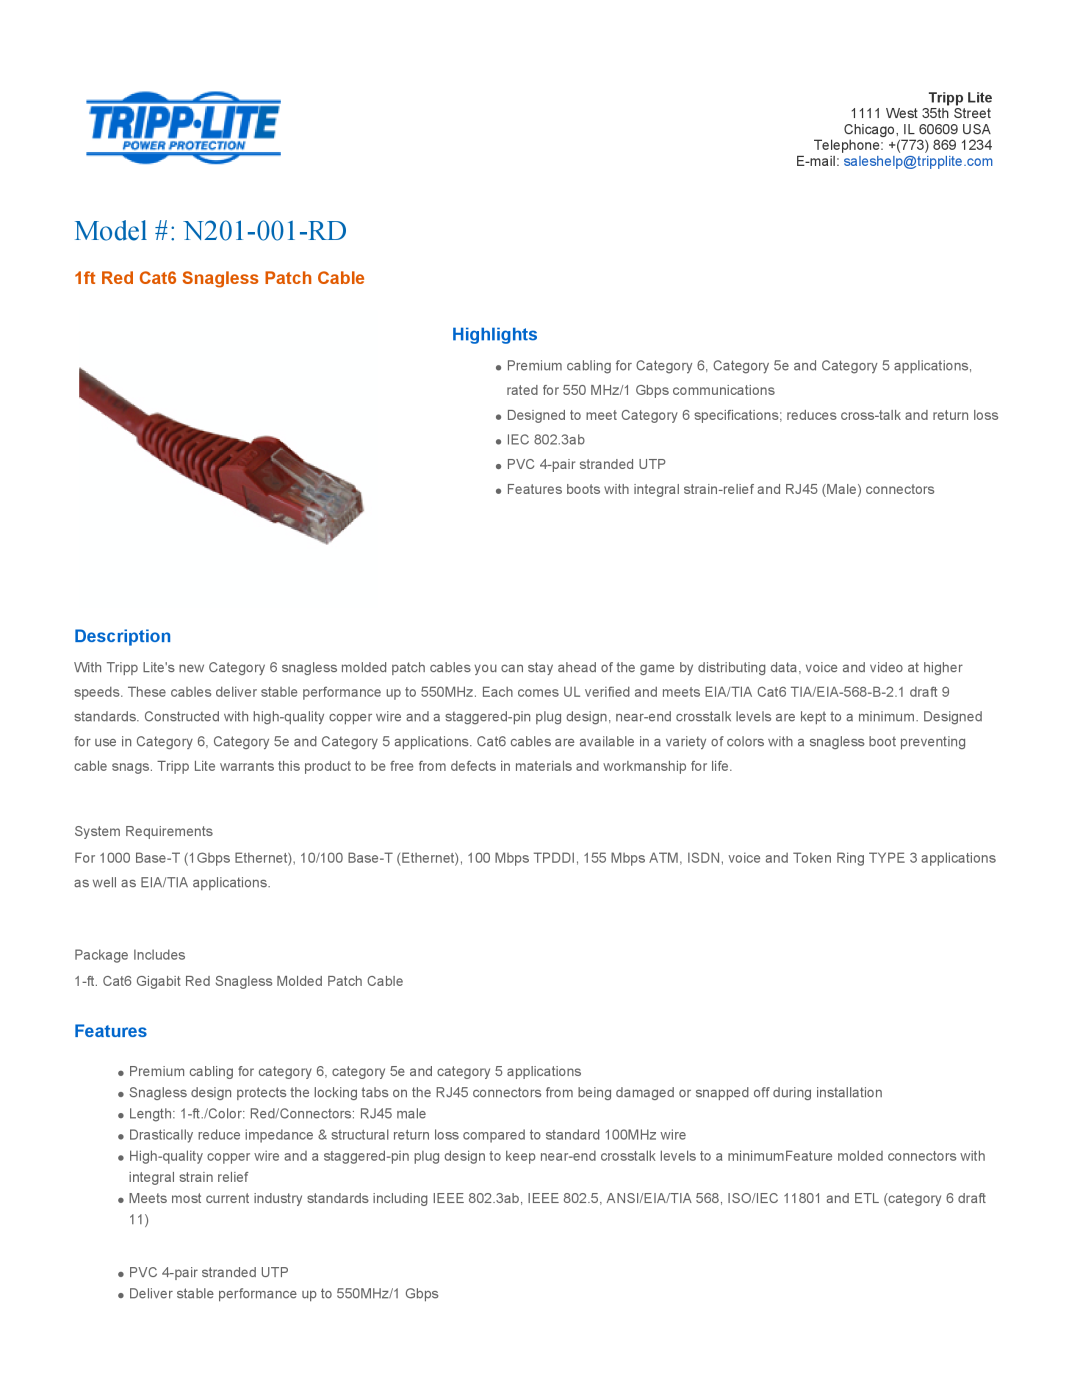 Tripp Lite specifications Highlights, Description, Features, Model # N201-001-RD, 1ft Red Cat6 Snagless Patch Cable 